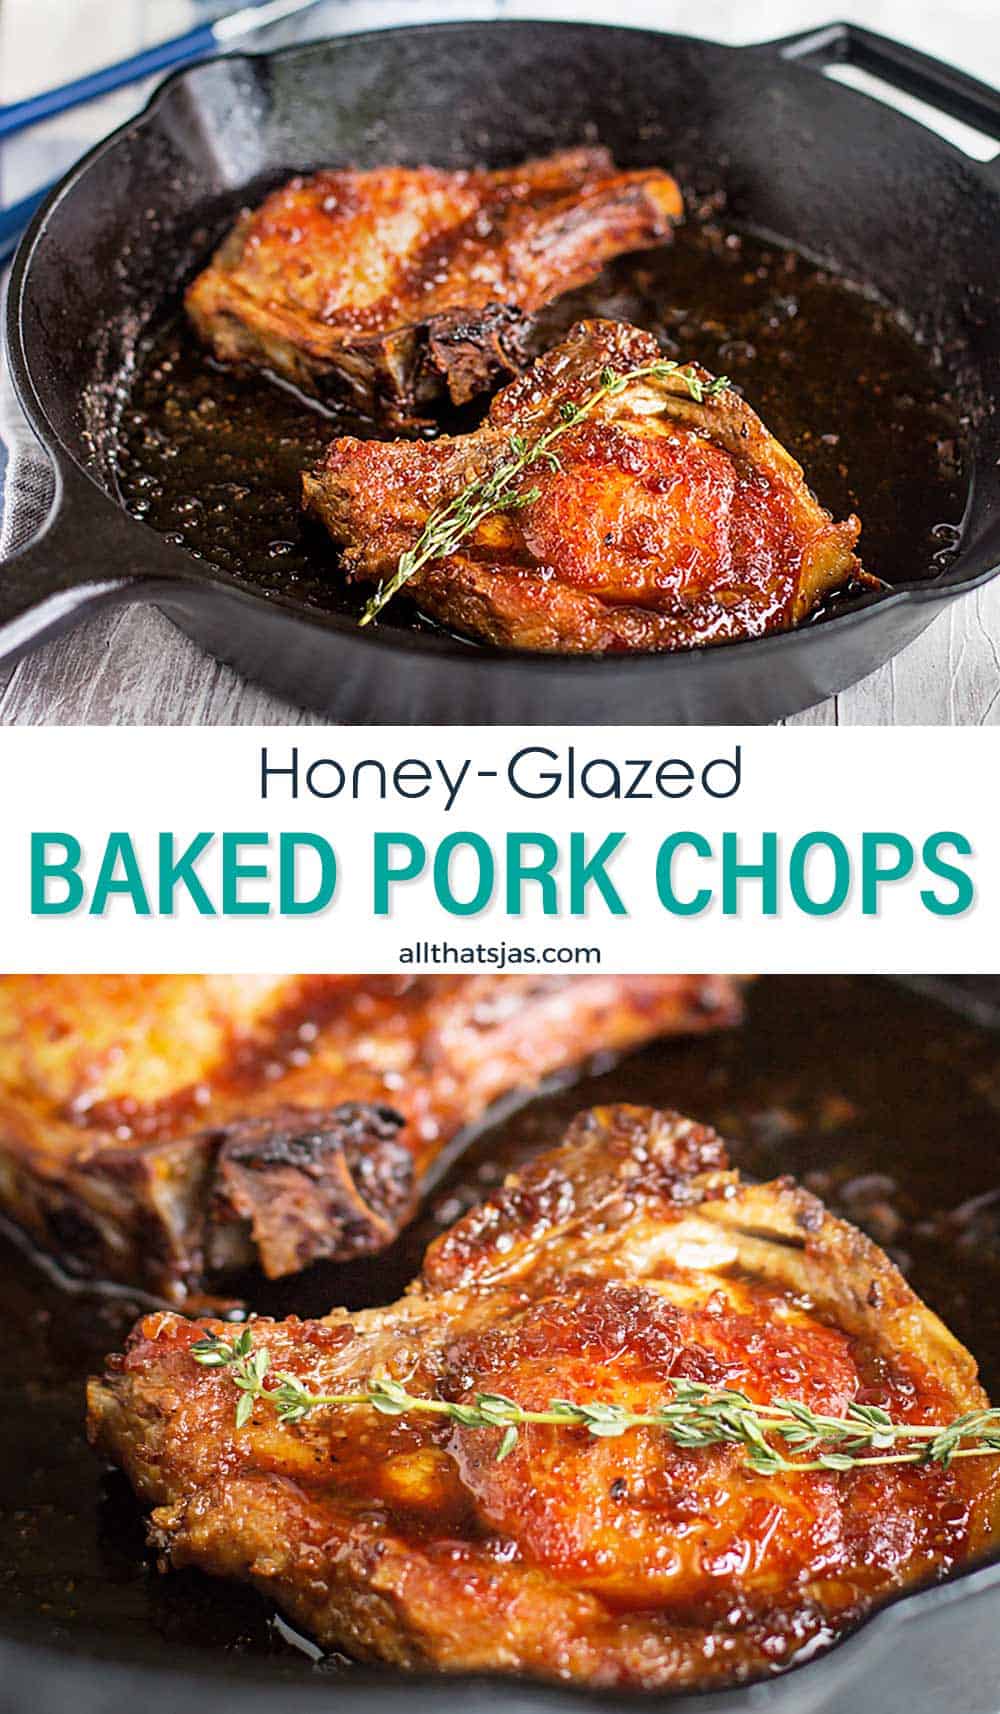 Two photo image of honey-glazed pork chops with text overlay in the middle.